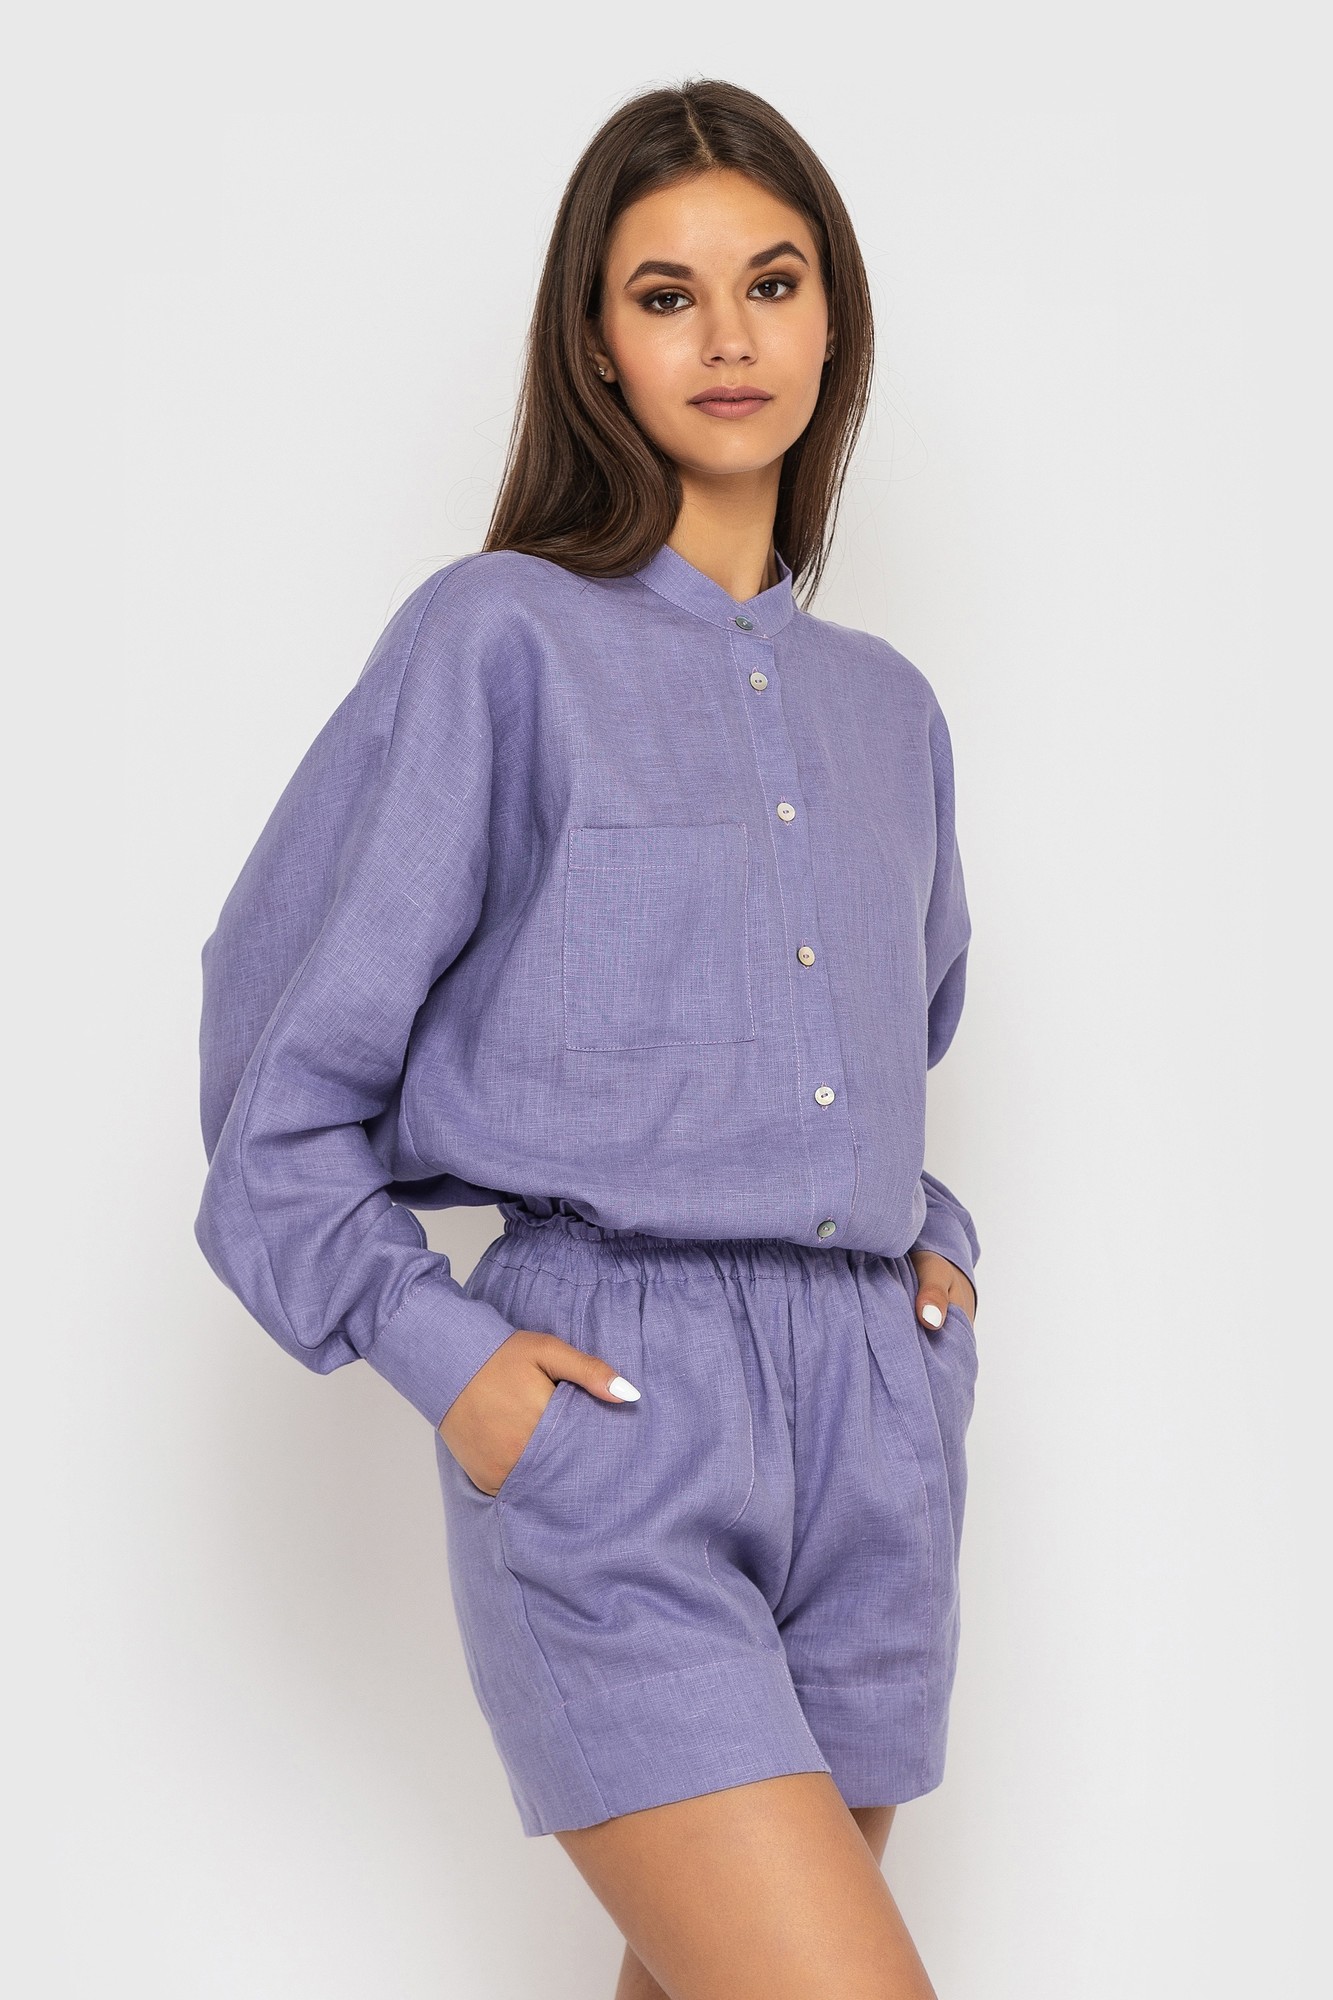 Linen Shorts in Lavender With High Elastic Waist